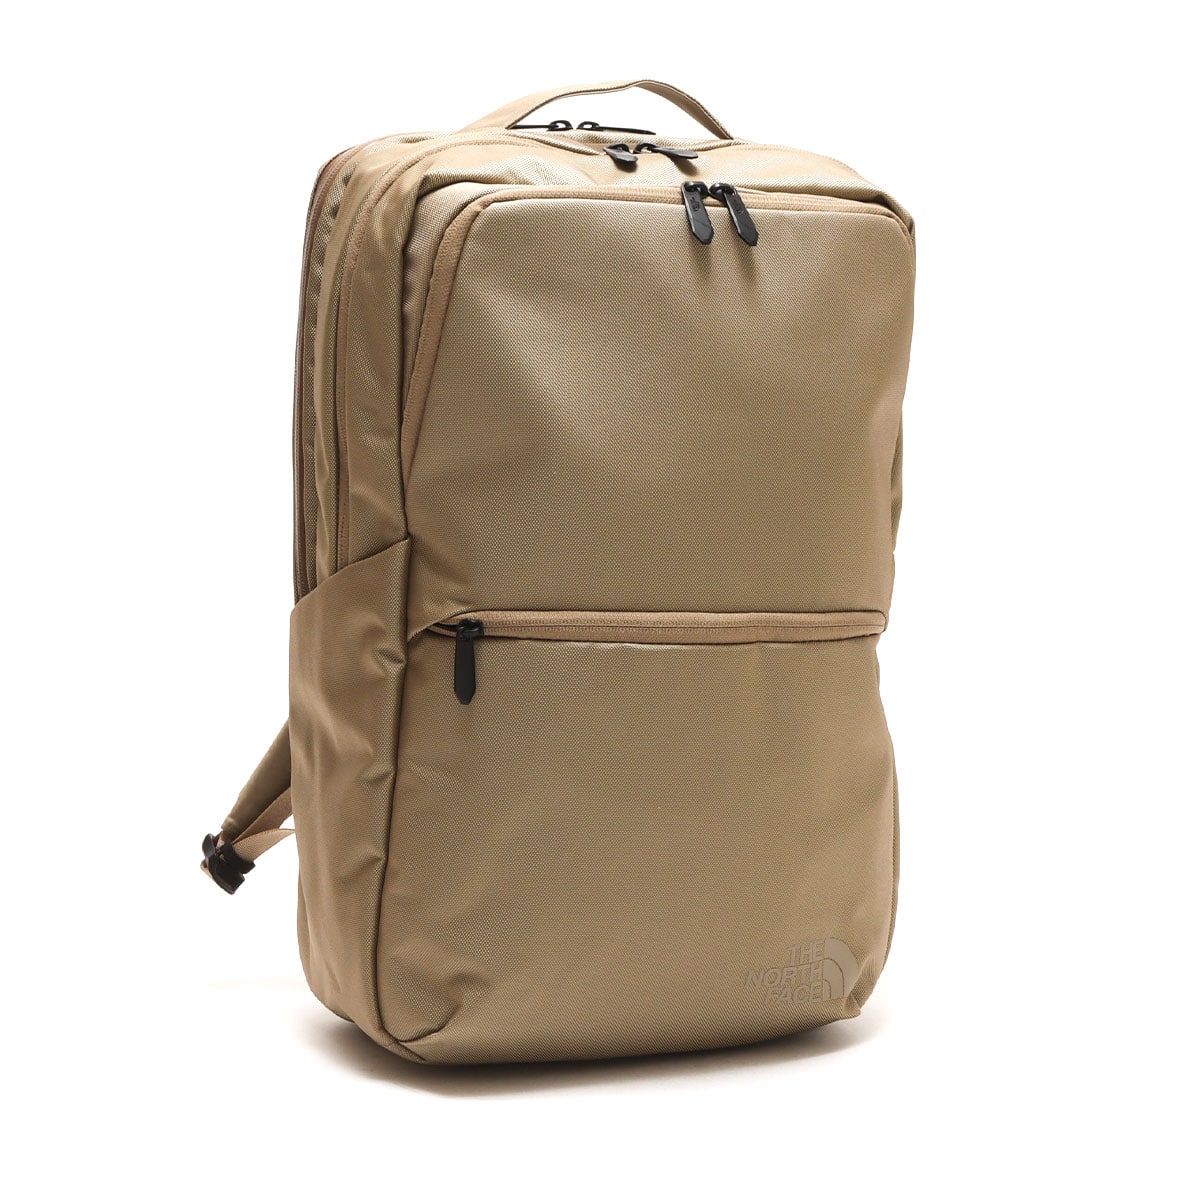 THE NORTH FACE SHUTTLE DAYPACK ティンバーウルフ 22SS-I